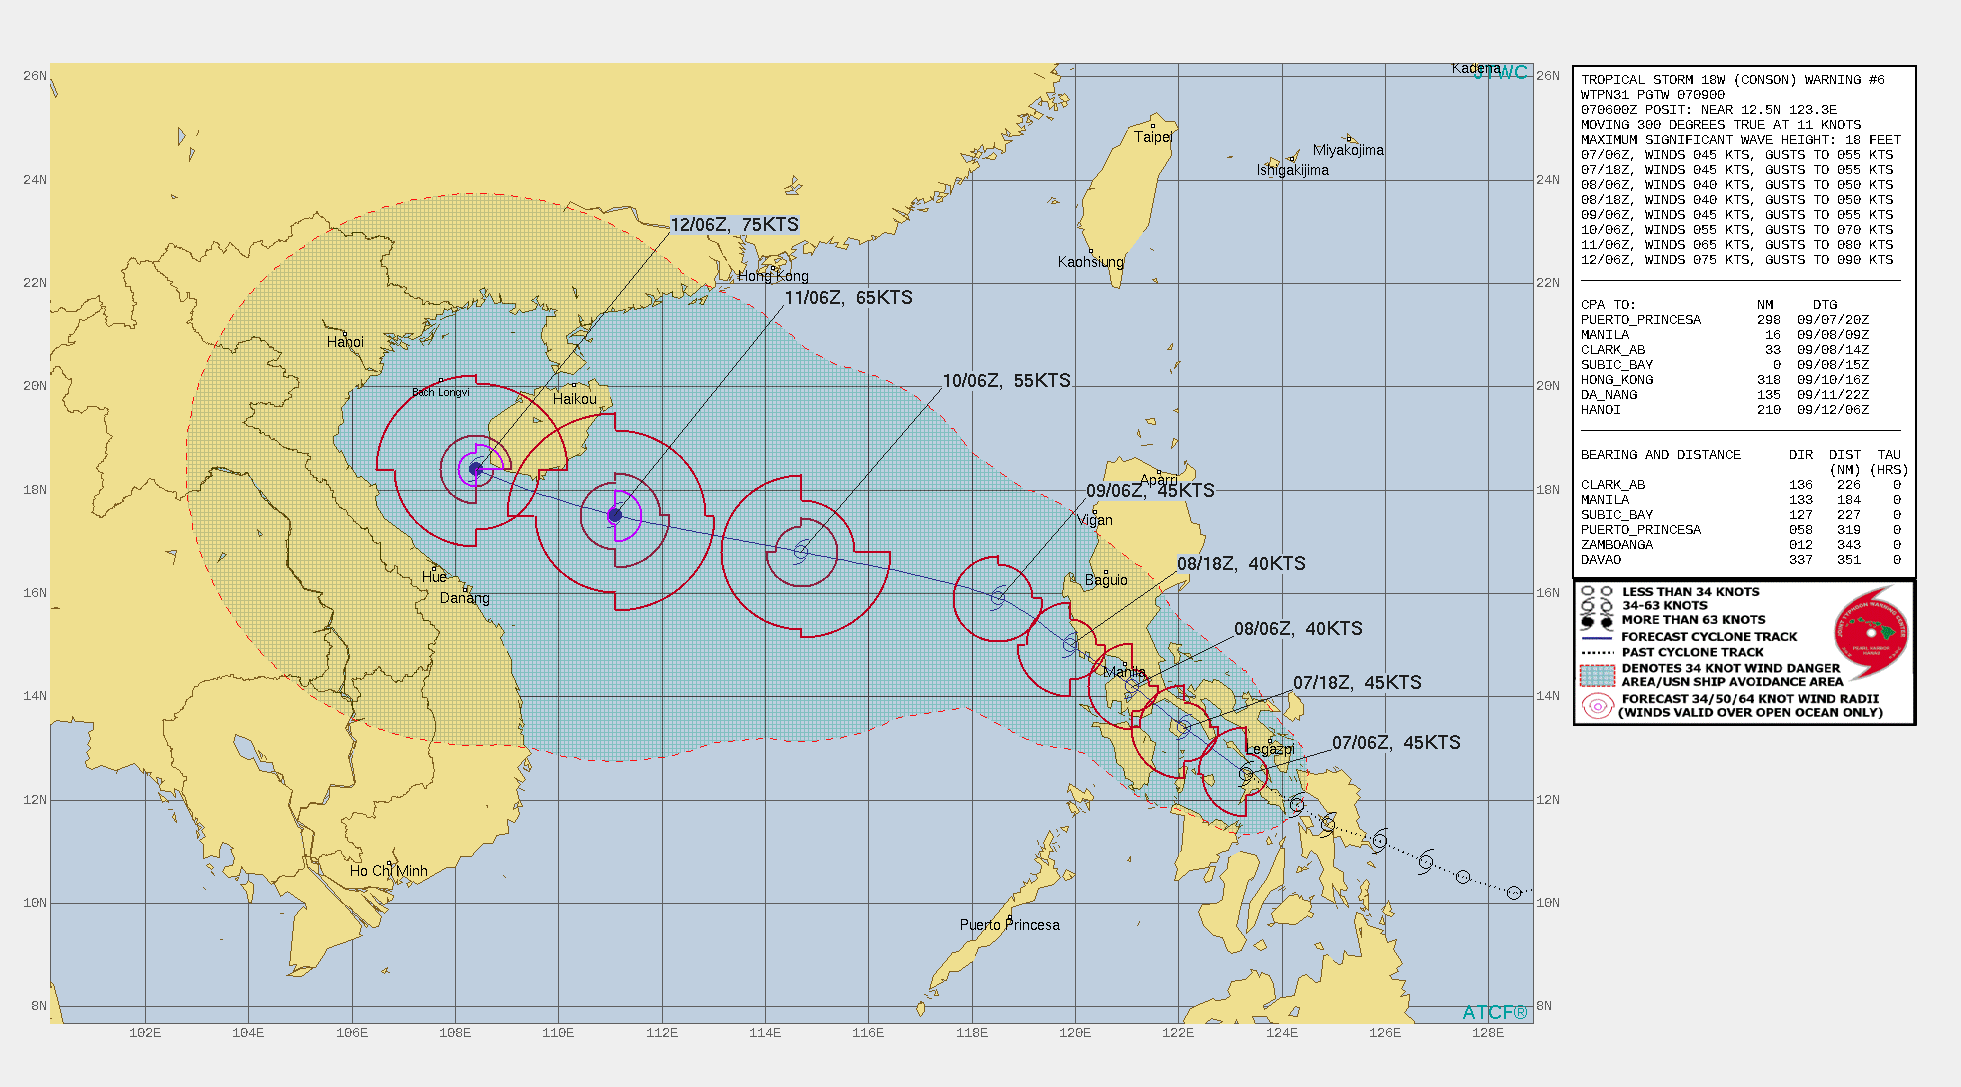 TS 18W(CONSON). WARNING 6 ISSUED AT 07/09UTC.SIGNIFICANT FORECAST CHANGES: THERE ARE NO SIGNIFICANT CHANGES TO THE FORECAST FROM THE PREVIOUS WARNING.  FORECAST DISCUSSION: TS 18W IS FORECAST TO CONTINUE TRACKING NORTHWESTWARD, GENERALLY TOWARDS THE MANILA METRO AREA, OVER THE NEXT 24 HOURS AND EMERGE INTO THE SOUTH CHINA SEA ONCE MORE NEAR 36H, MOVING ALONG THE WESTERN PERIPHERY OF THE NEAR EQUATORIAL RIDGE(NER) CENTERED TO THE EAST AND THE SOUTHERN PERIPHERY OF THE SUBTROPICAL RIDGE(STR)TO THE NORTH. AFTER EMERGING INTO THE SOUTH CHINA SEA, THE TRACK OF 18W IS FORECAST TO FLATTEN OUT, BECOMING MORE WEST-NORTHWESTWARD AS THE STR TO THE NORTH BECOMES THE DOMINATE STEERING MECHANISM. AS THE SYSTEM TRACKS OVER THE SIBUYAN SEA IT IS LIKELY TO MAINTAIN ITS CURRENT INTENSITY, AND COULD POTENTIALLY SEE SHORT-TERM INTENSIFICATION WHILE OVER THE WARM WATERS, BEFORE MAKING ANOTHER LANDFALL ON THE SOUTHERN COAST OF LUZON SOUTHEAST OF MANILA. THE RUGGED TERRAIN WILL SERVE TO WEAKEN TS 18W TO 40 KNOTS BEFORE REEMERGING OVER OPEN WATERS NEAR 36H. ENVIRONMENTAL CONDITIONS OF LOW (10-15 KTS) VERTICAL WIND SHEAR, MODERATE WESTWARD OUTFLOW AND WARM (29C) SSTS, ARE EXPECTED TO REMAIN FAVORABLE AND SUPPORT SLOW BUT STEADY INTENSIFICATION AFTER 48H, REACHING A PEAK OF 75 KNOTS/CAT 1 BY 120H.